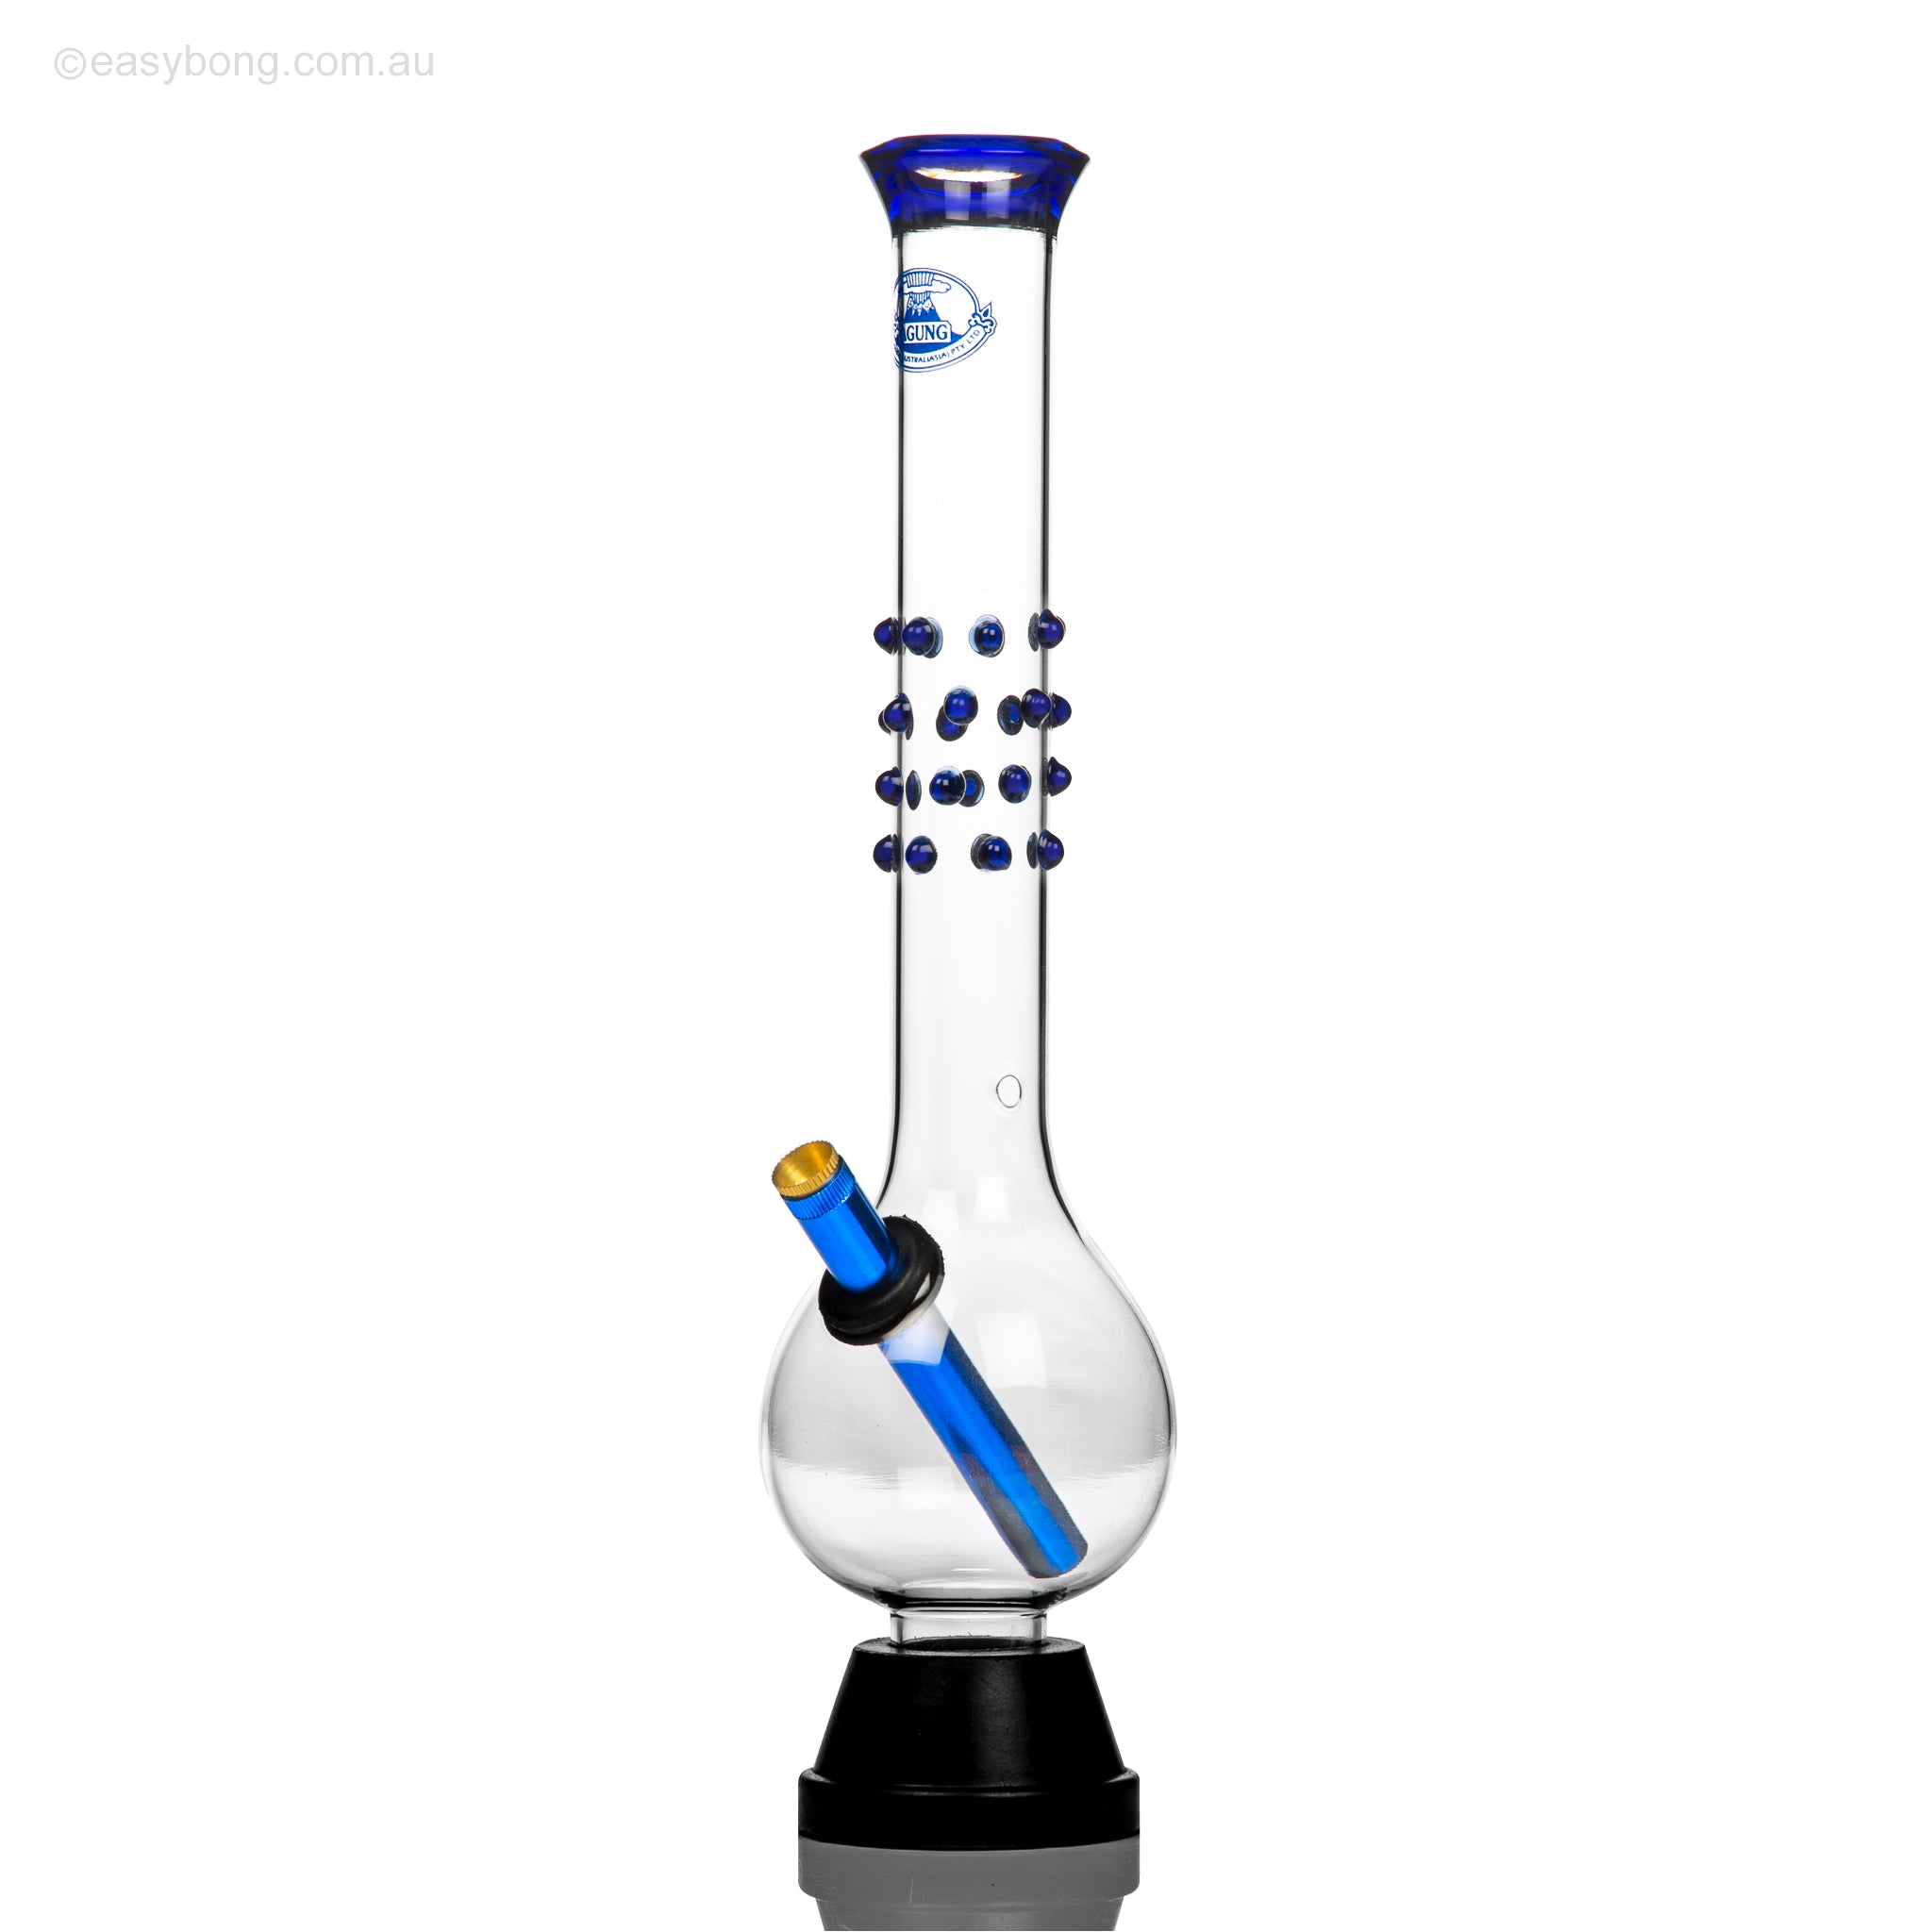 Agung large blue dot bubble bong. This is 38cm tall and features blue accents.